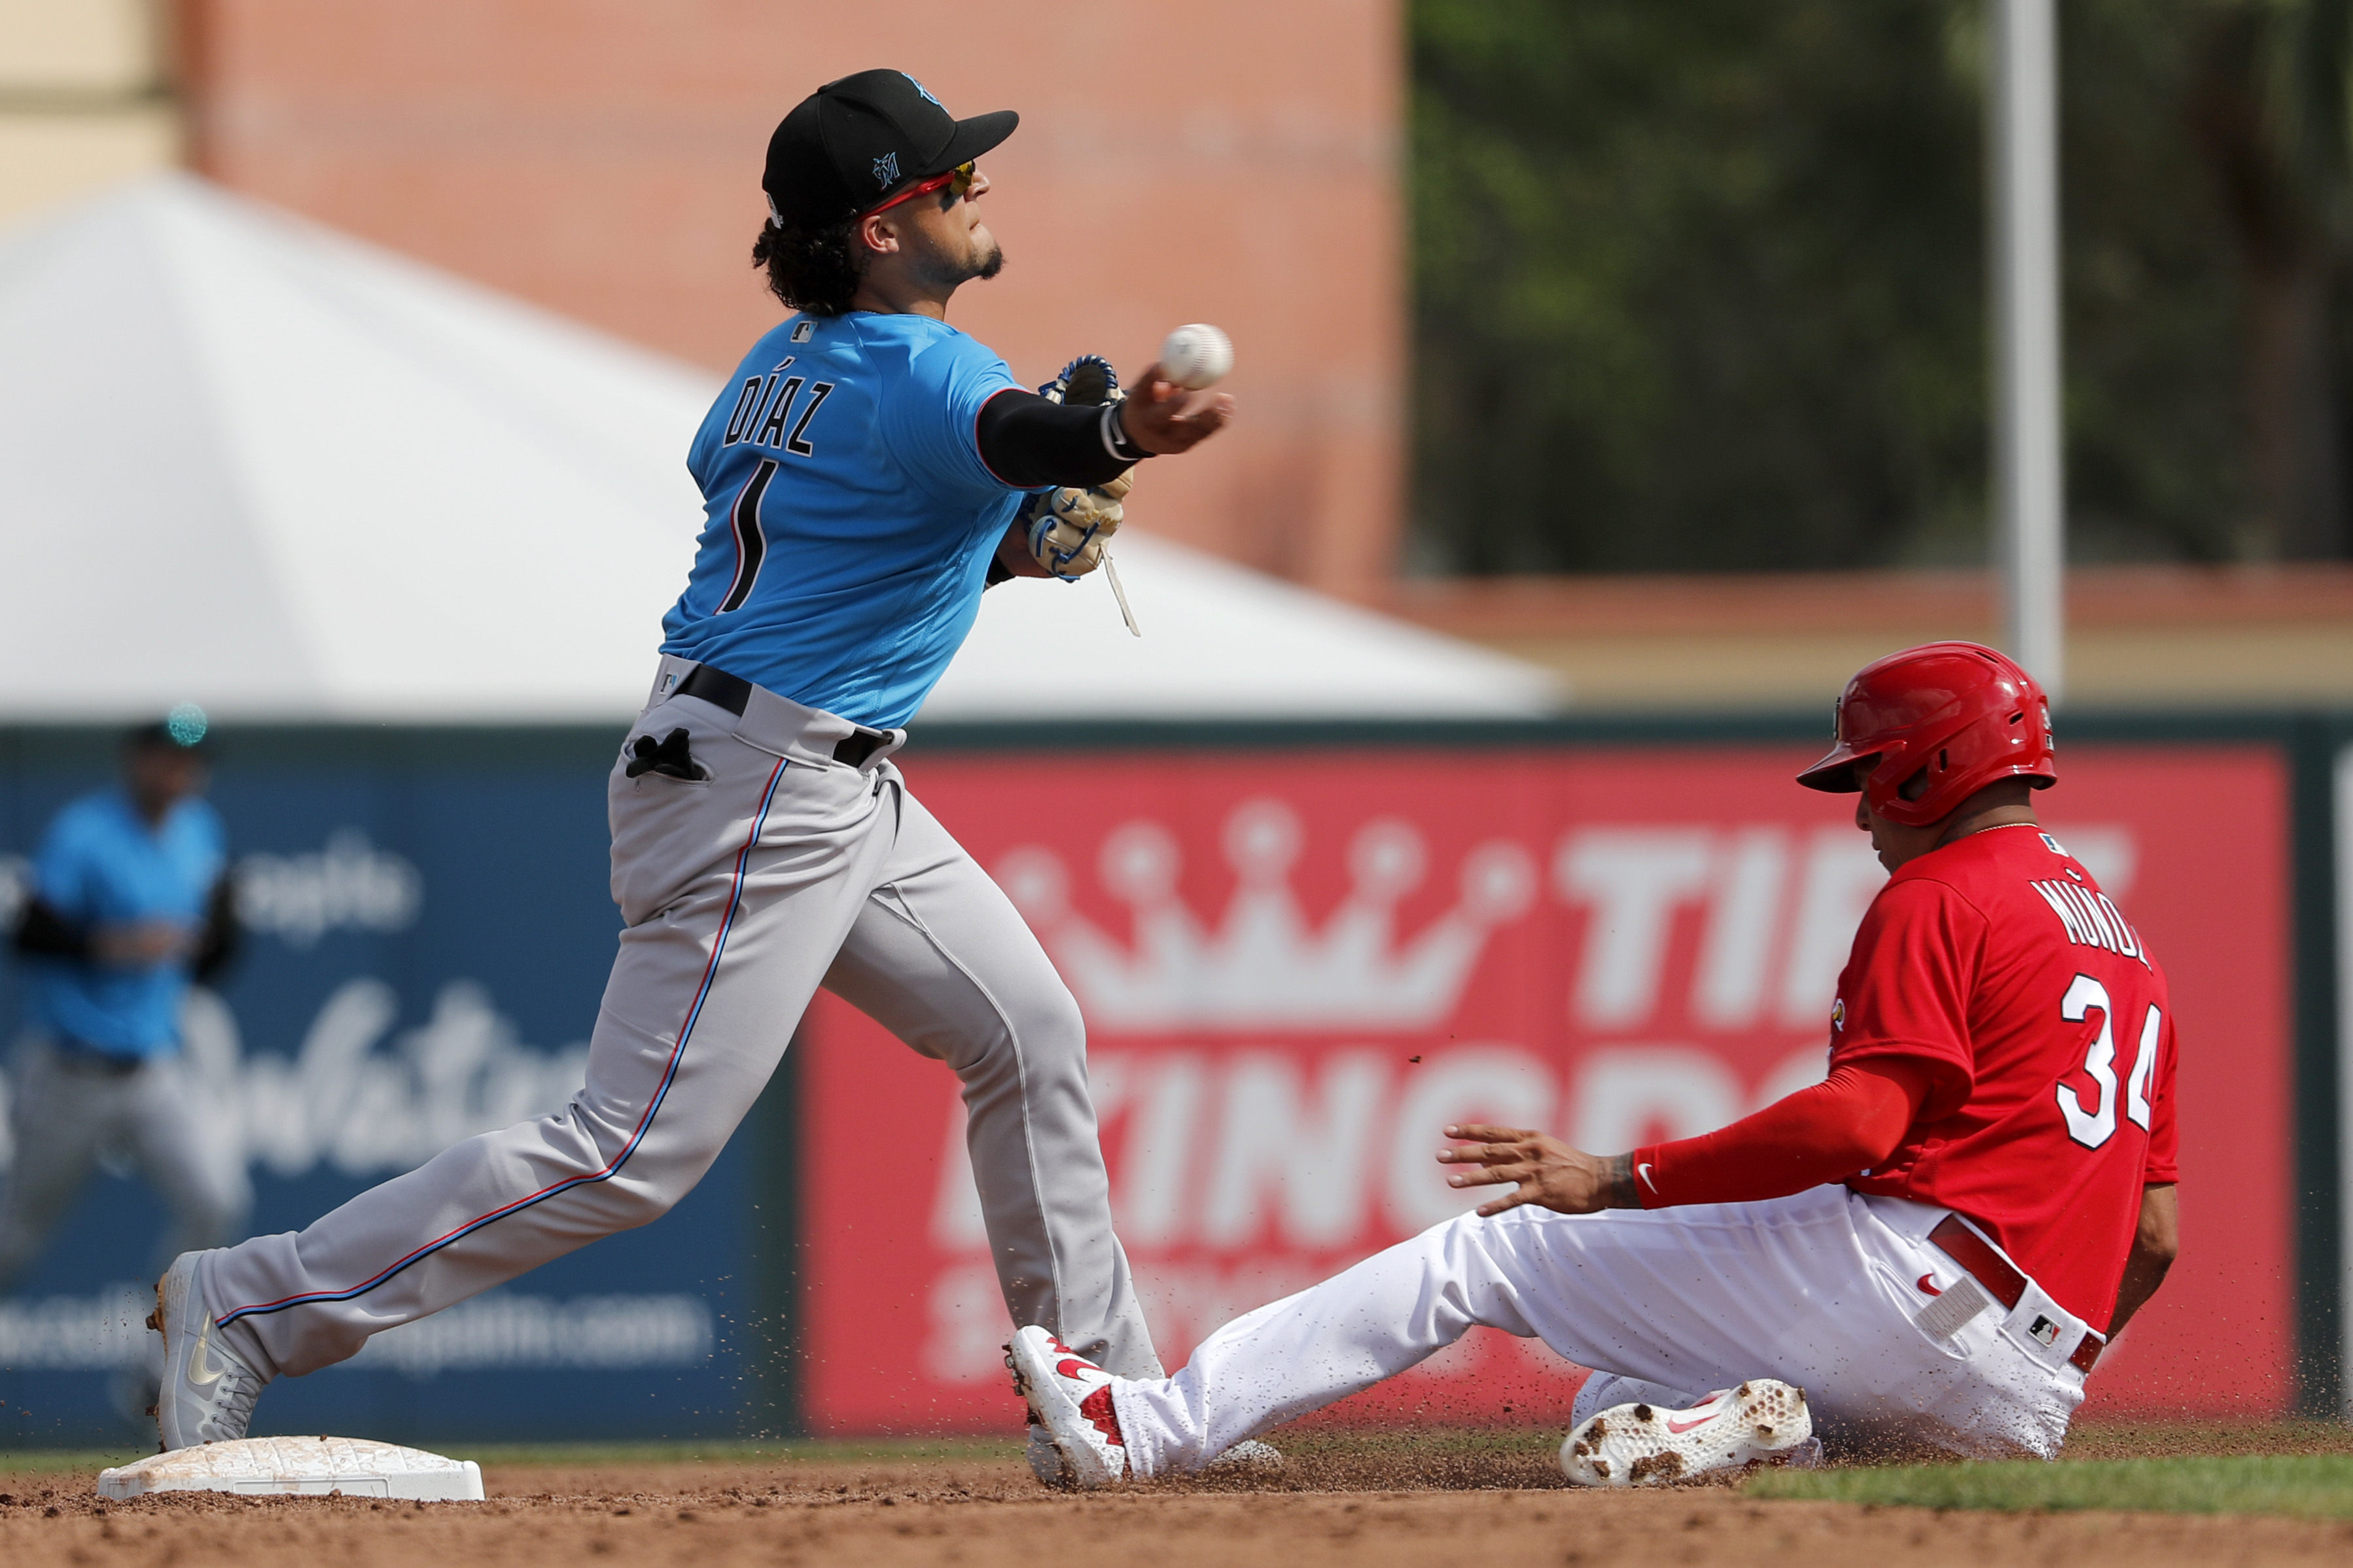 Who is Yairo Munoz, and how did he end up with the Red Sox? - The